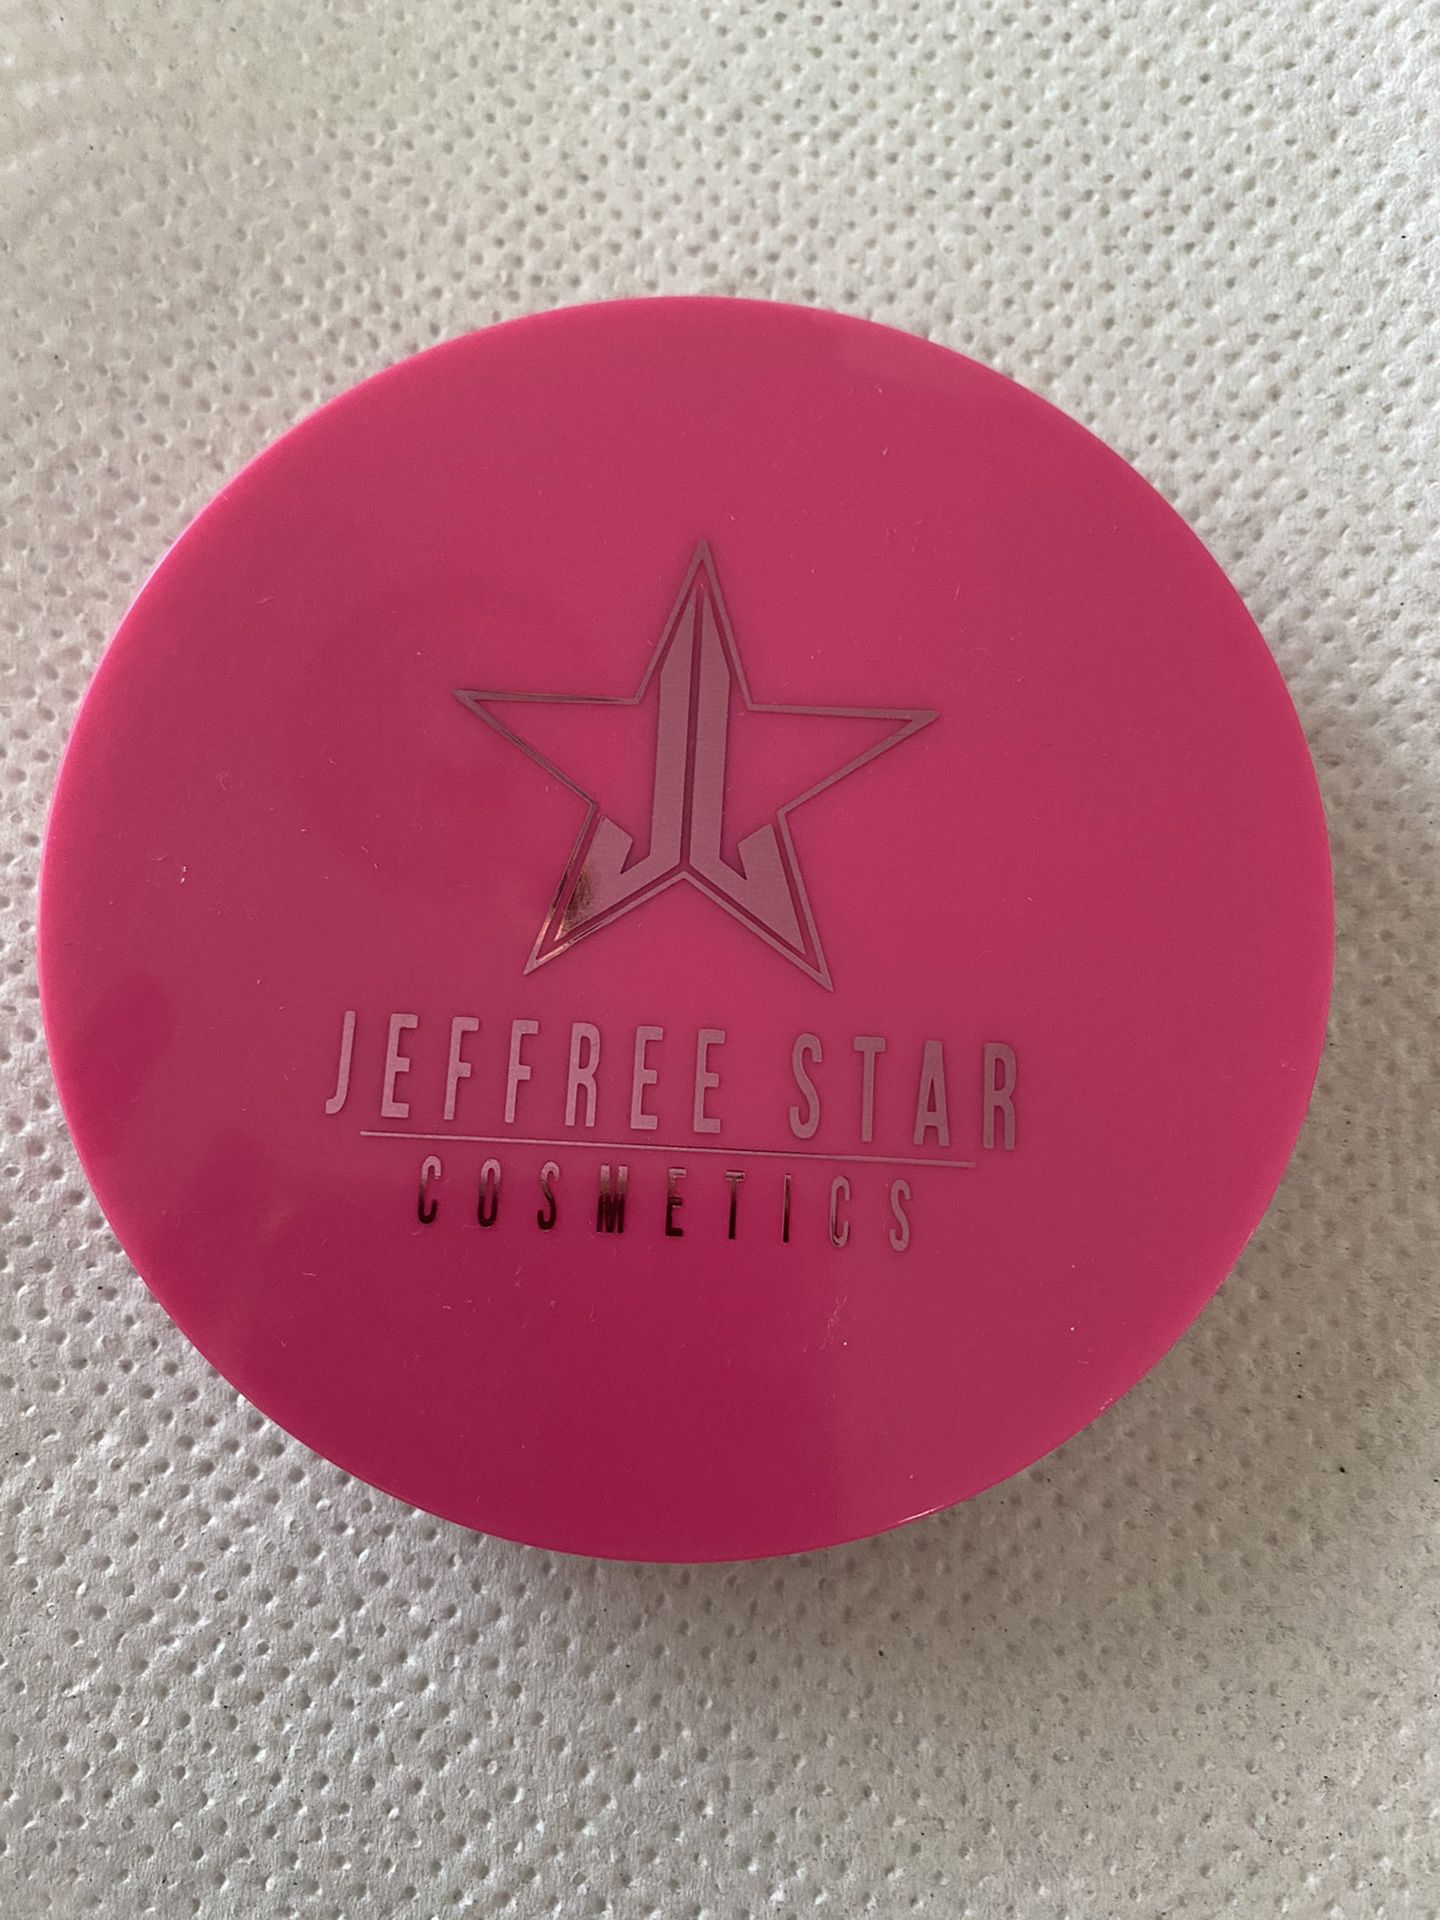 Jeffree Star Mint Condition Highlighter